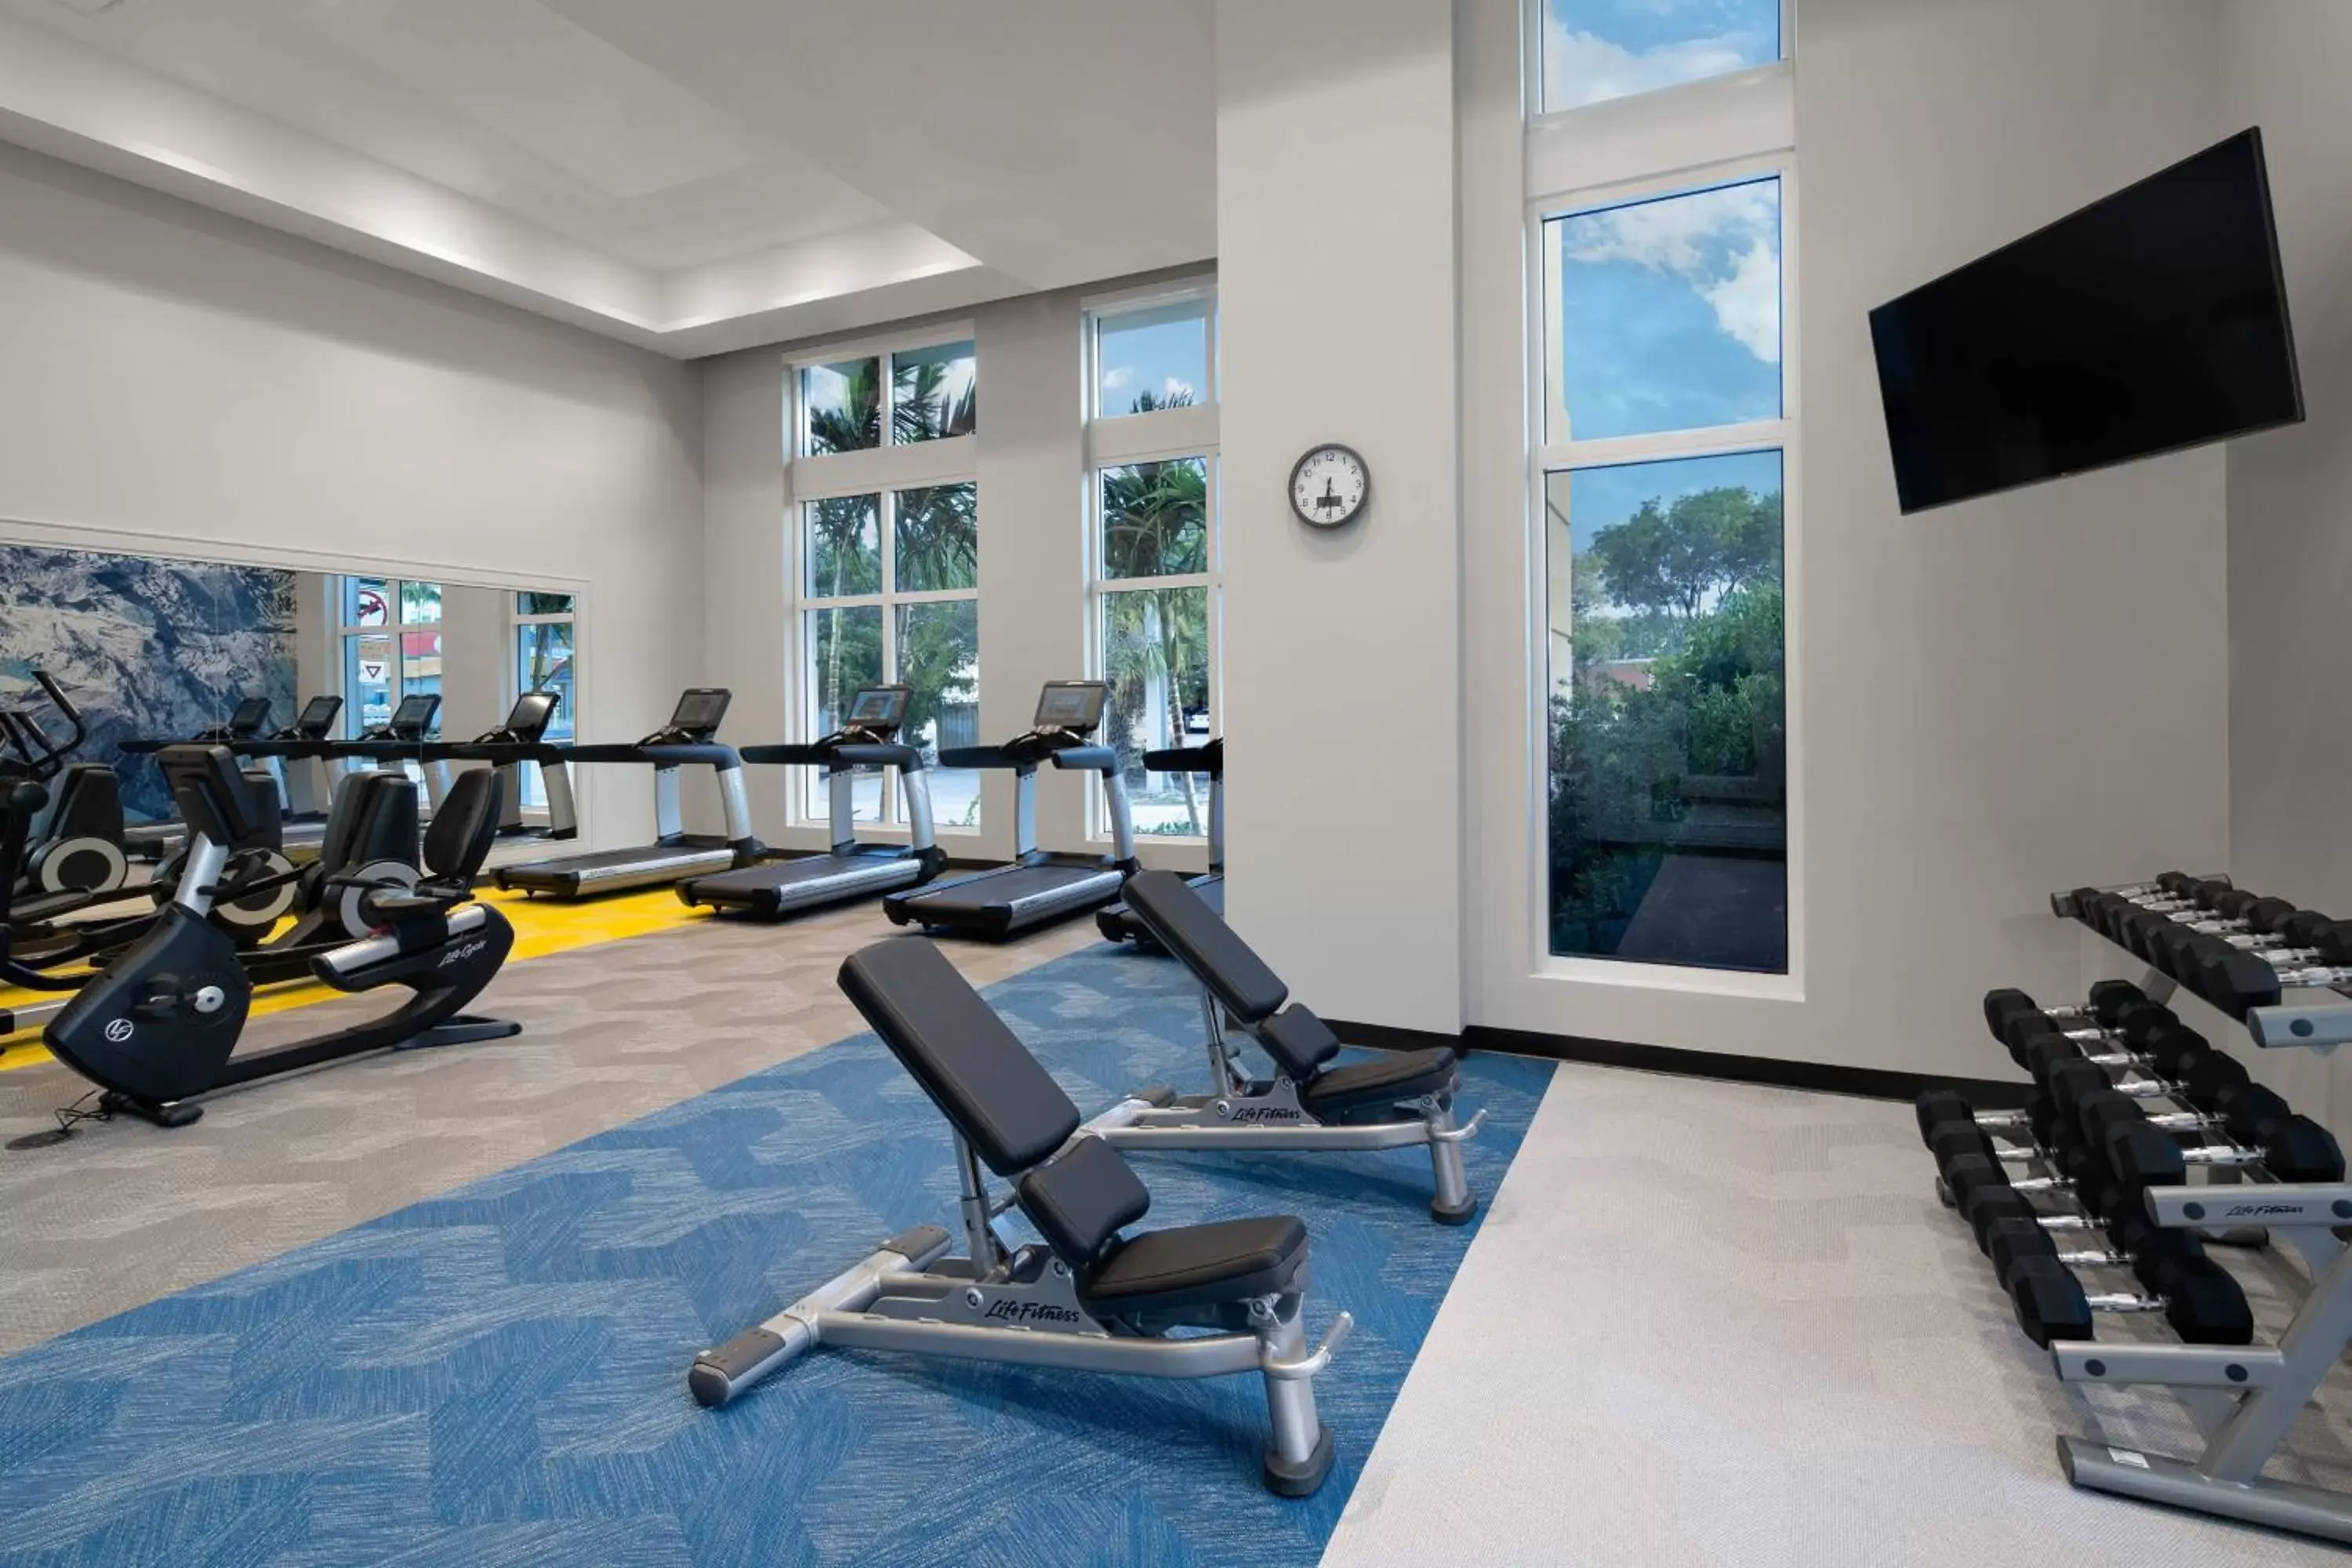 Fitness centre/facilities, Fitness Center/Facilities in Courtyard by Marriott Delray Beach